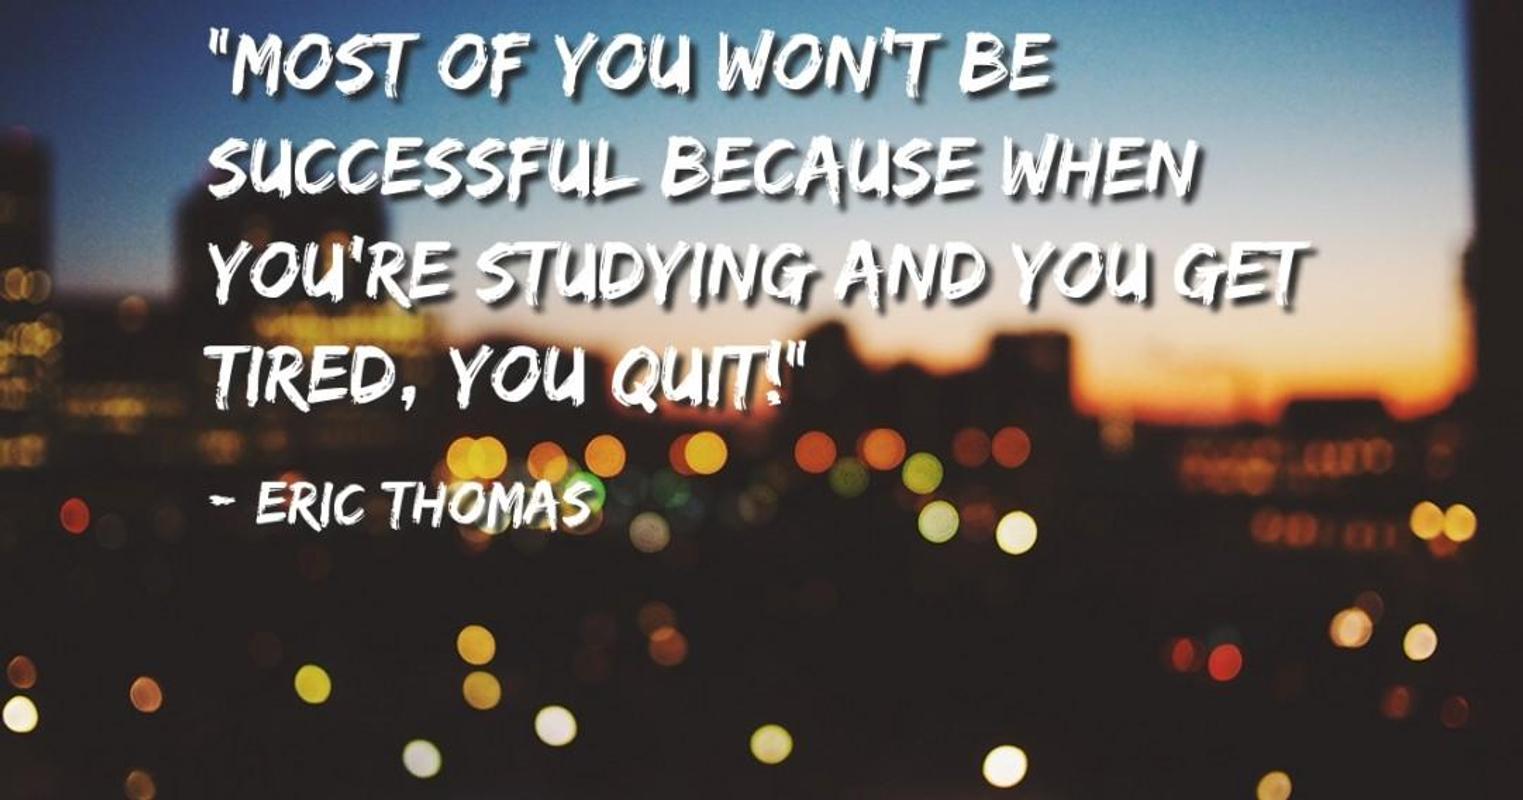 Eric Thomas Inspiring Images Quotes and Motivating Sayings